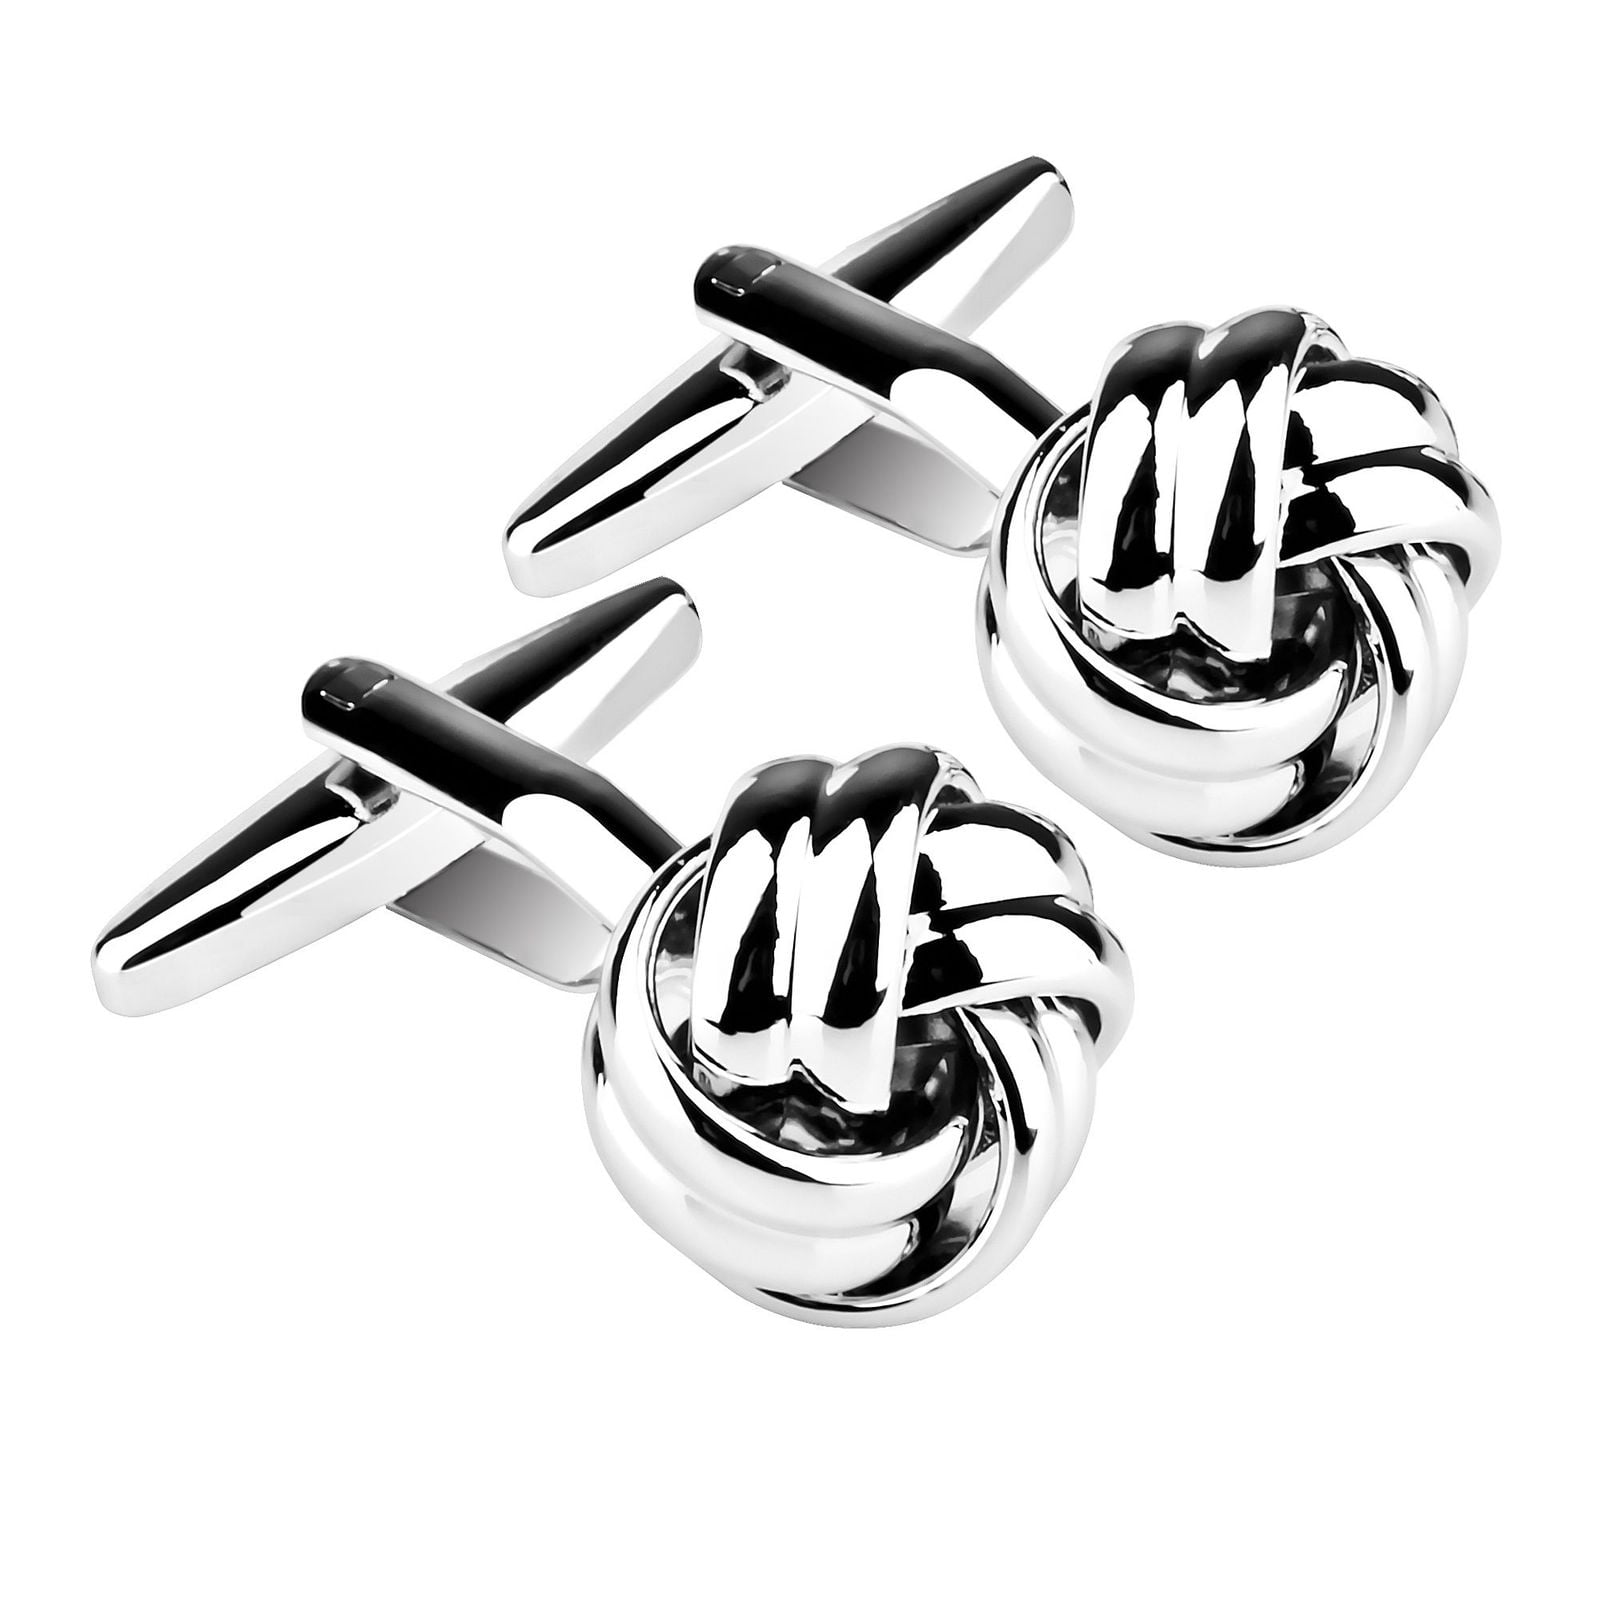 Adisaer Mens Stainless Steel Cuff Links Enamel Moon Crystal Round Mens Dress Cufflink Business His Gift